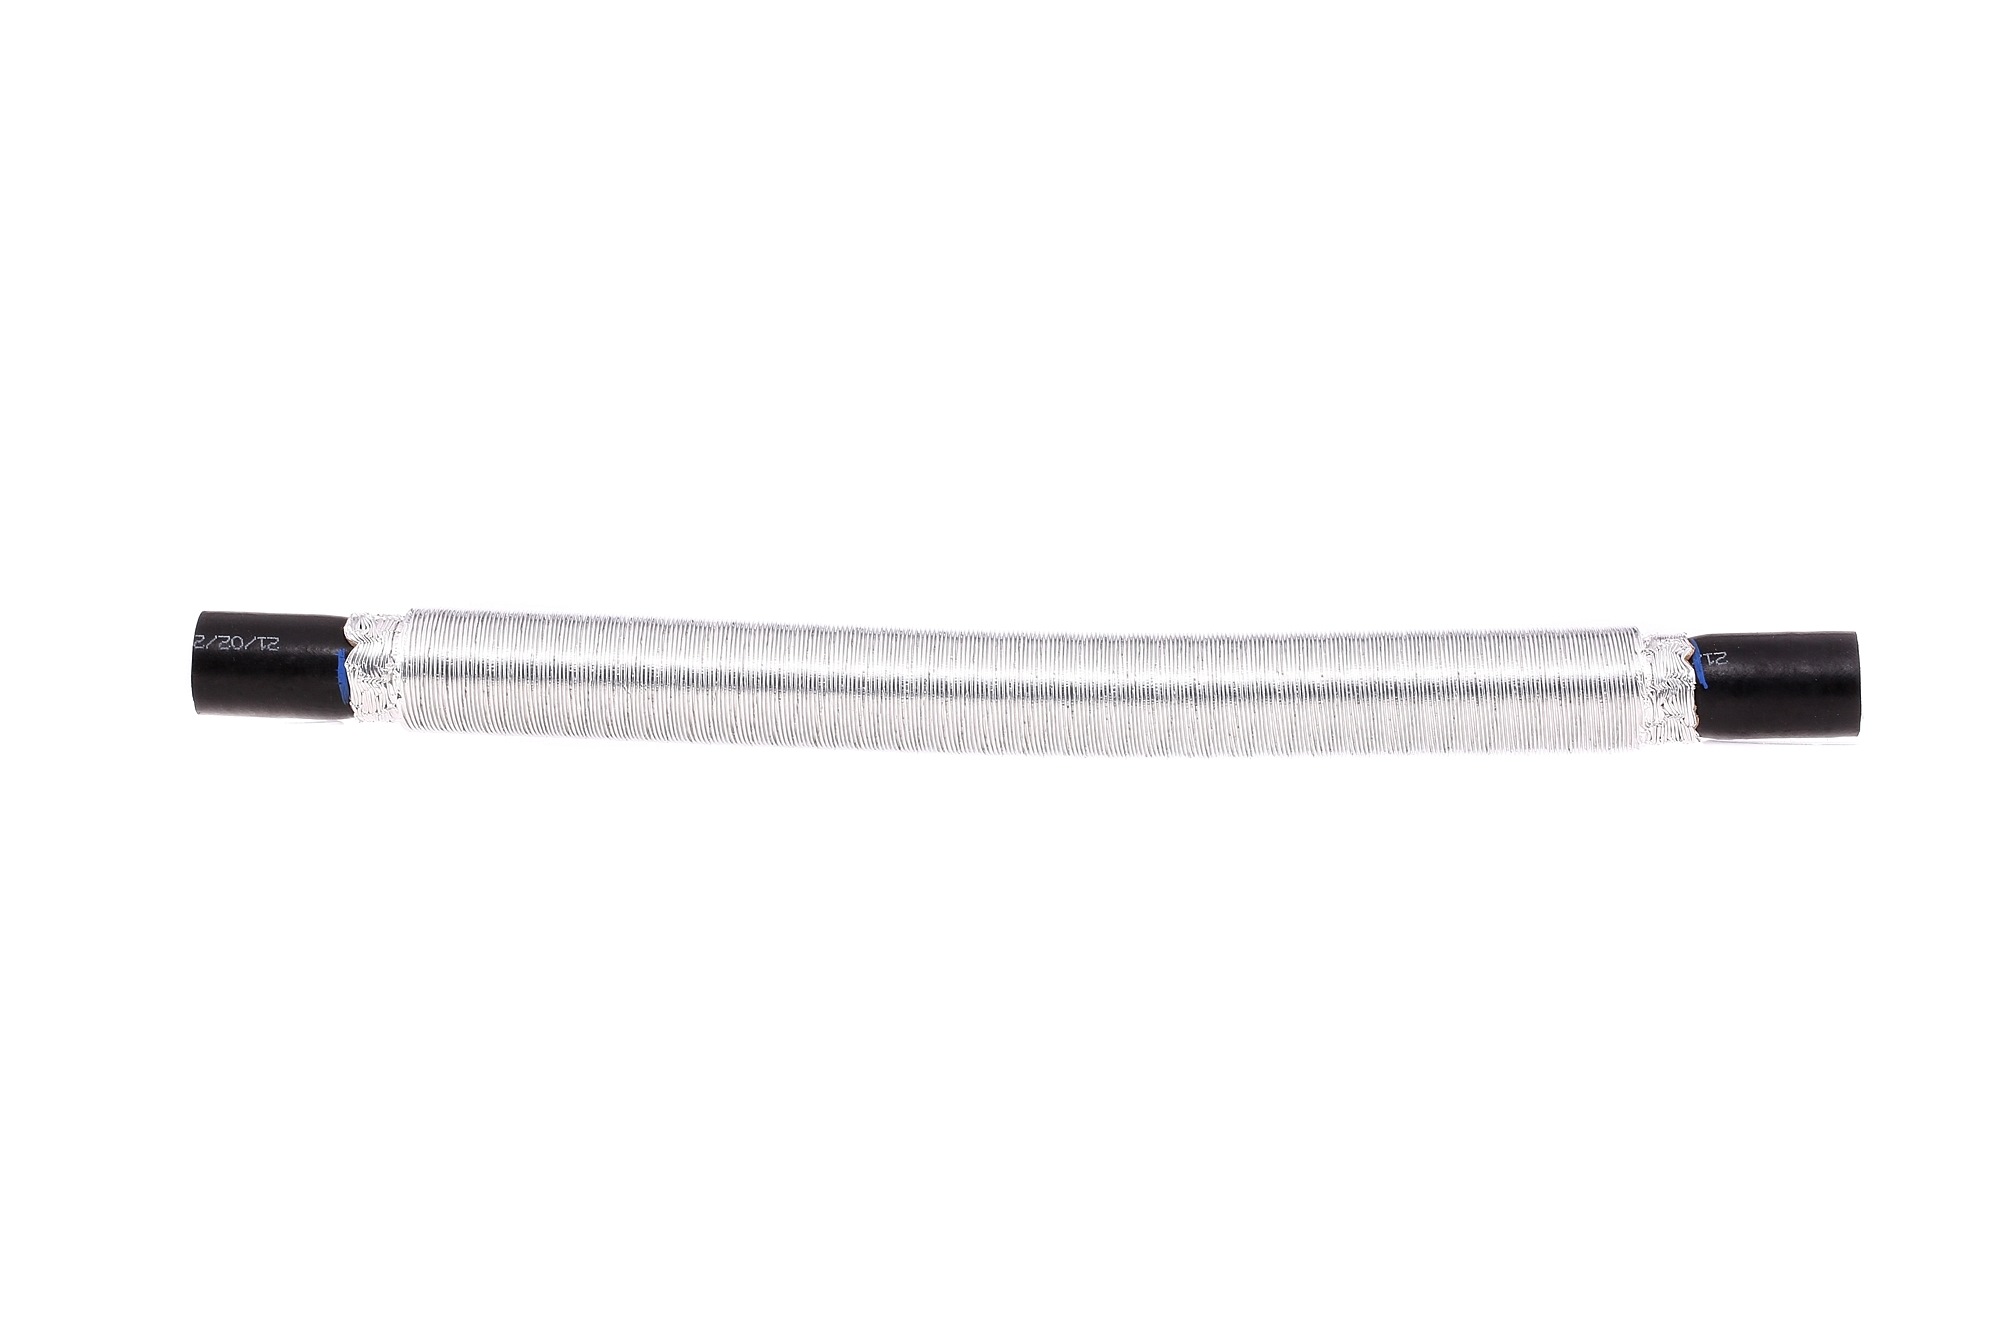 Steering hose / pipe MEYLE from fluid reservoir to hydraulic pump, ORIGINAL Quality - 359 202 0039